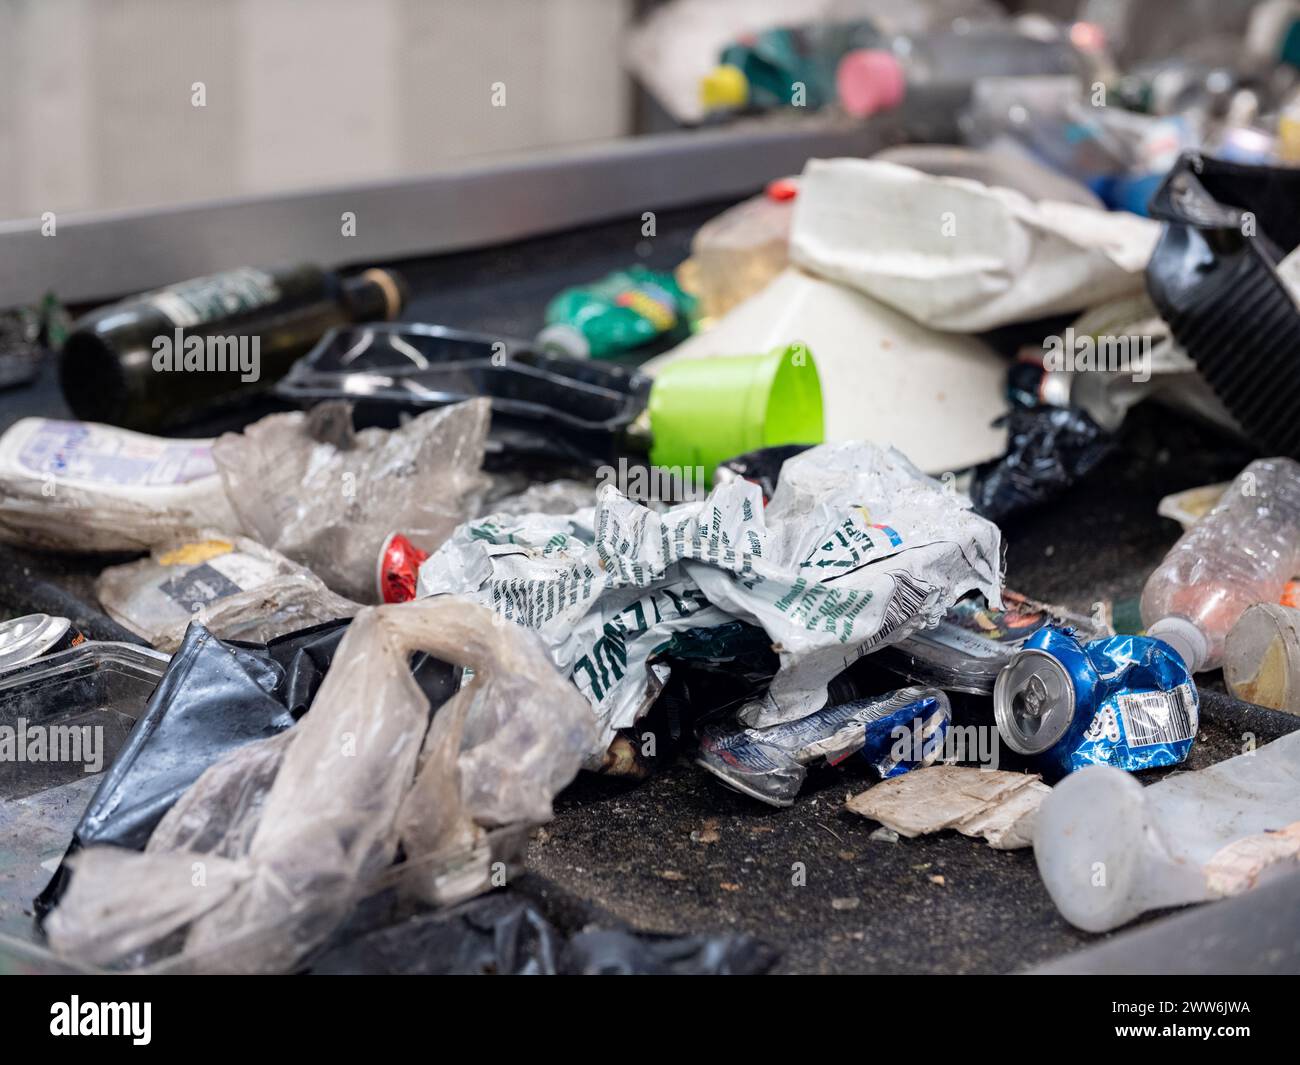 Plastic waste on a conveyor belt in a waste management plant Stock Photo